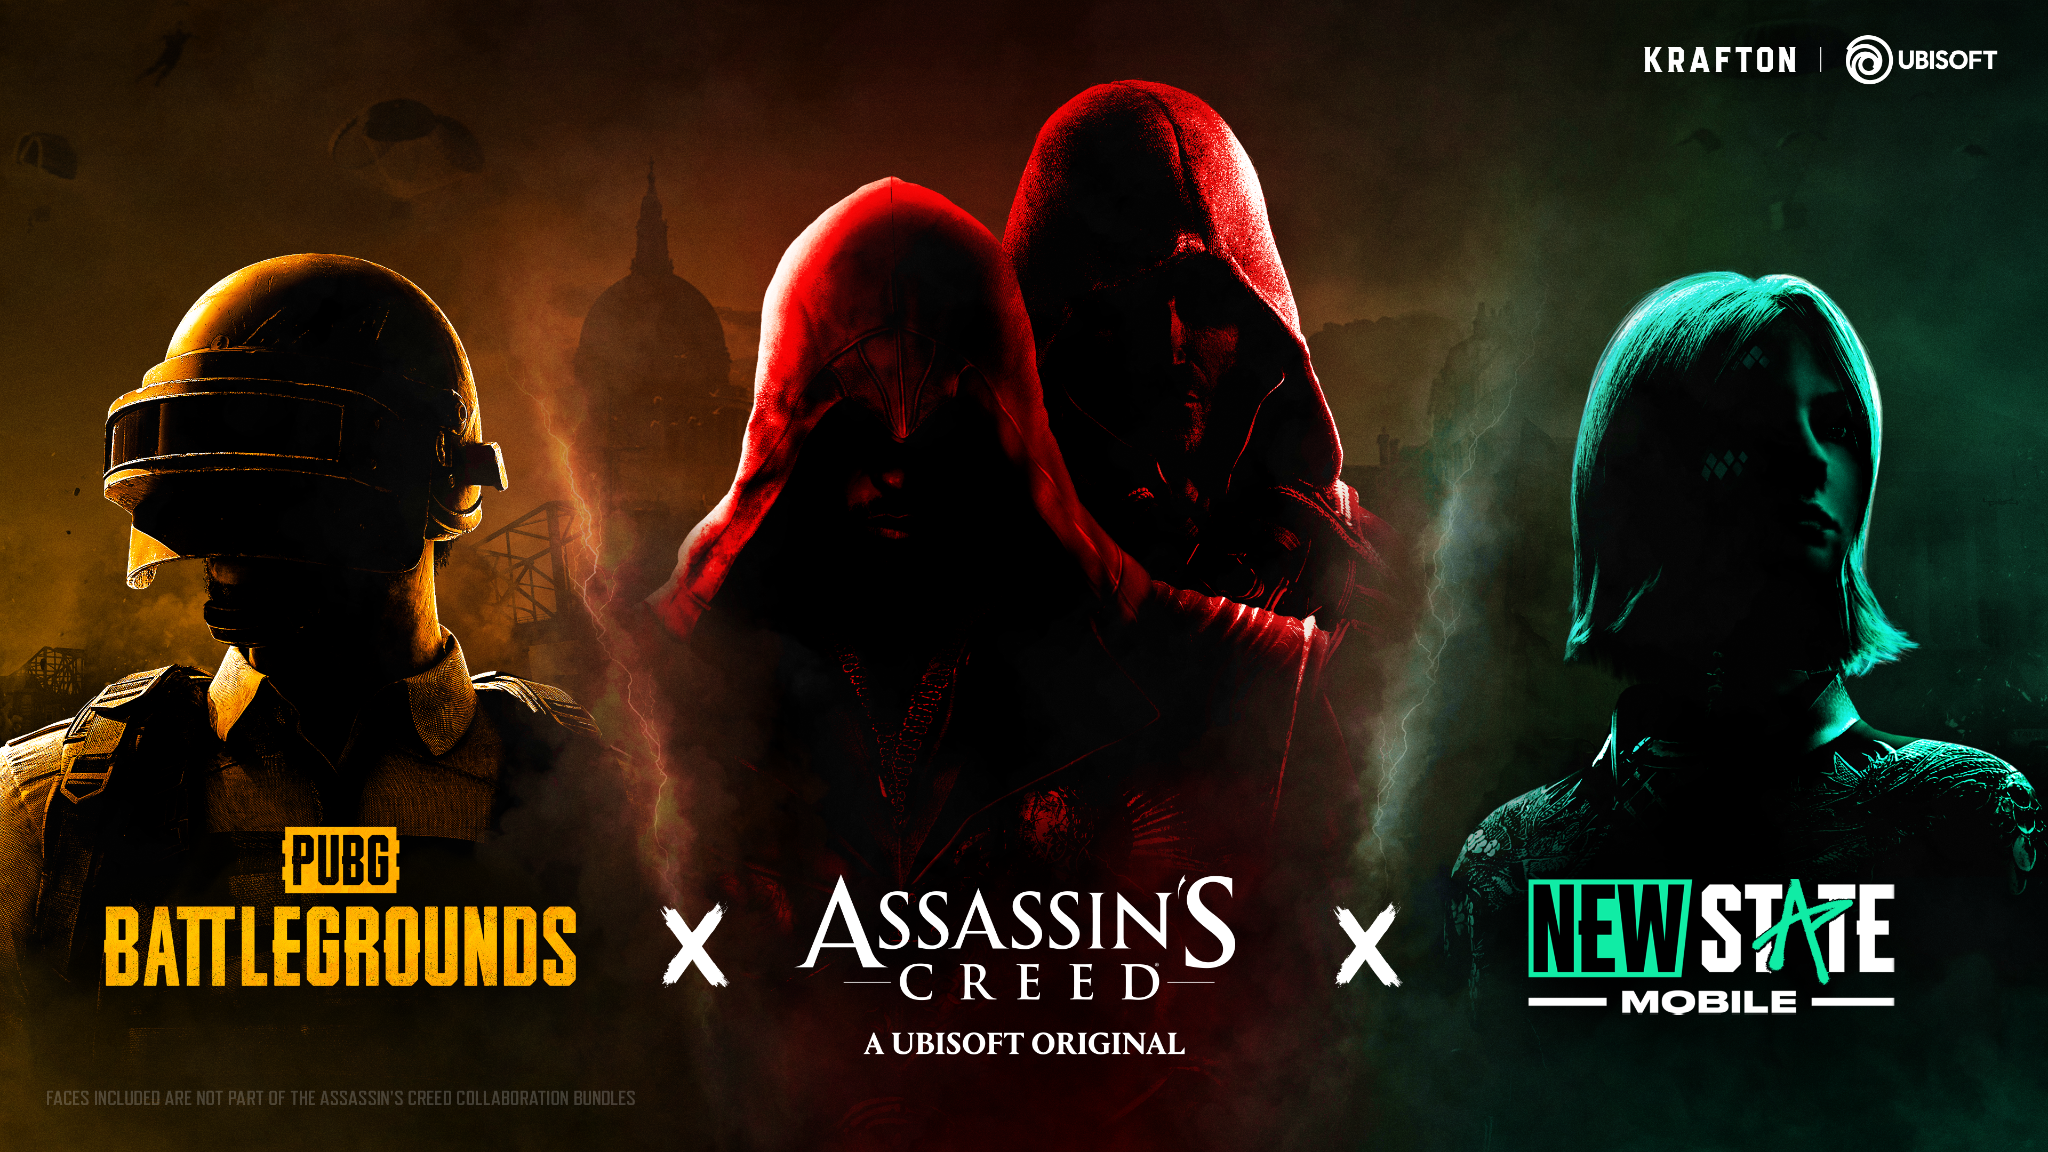 A graphic showing silhouettes of soldiers from PUBG and Assassins in peaked hoods